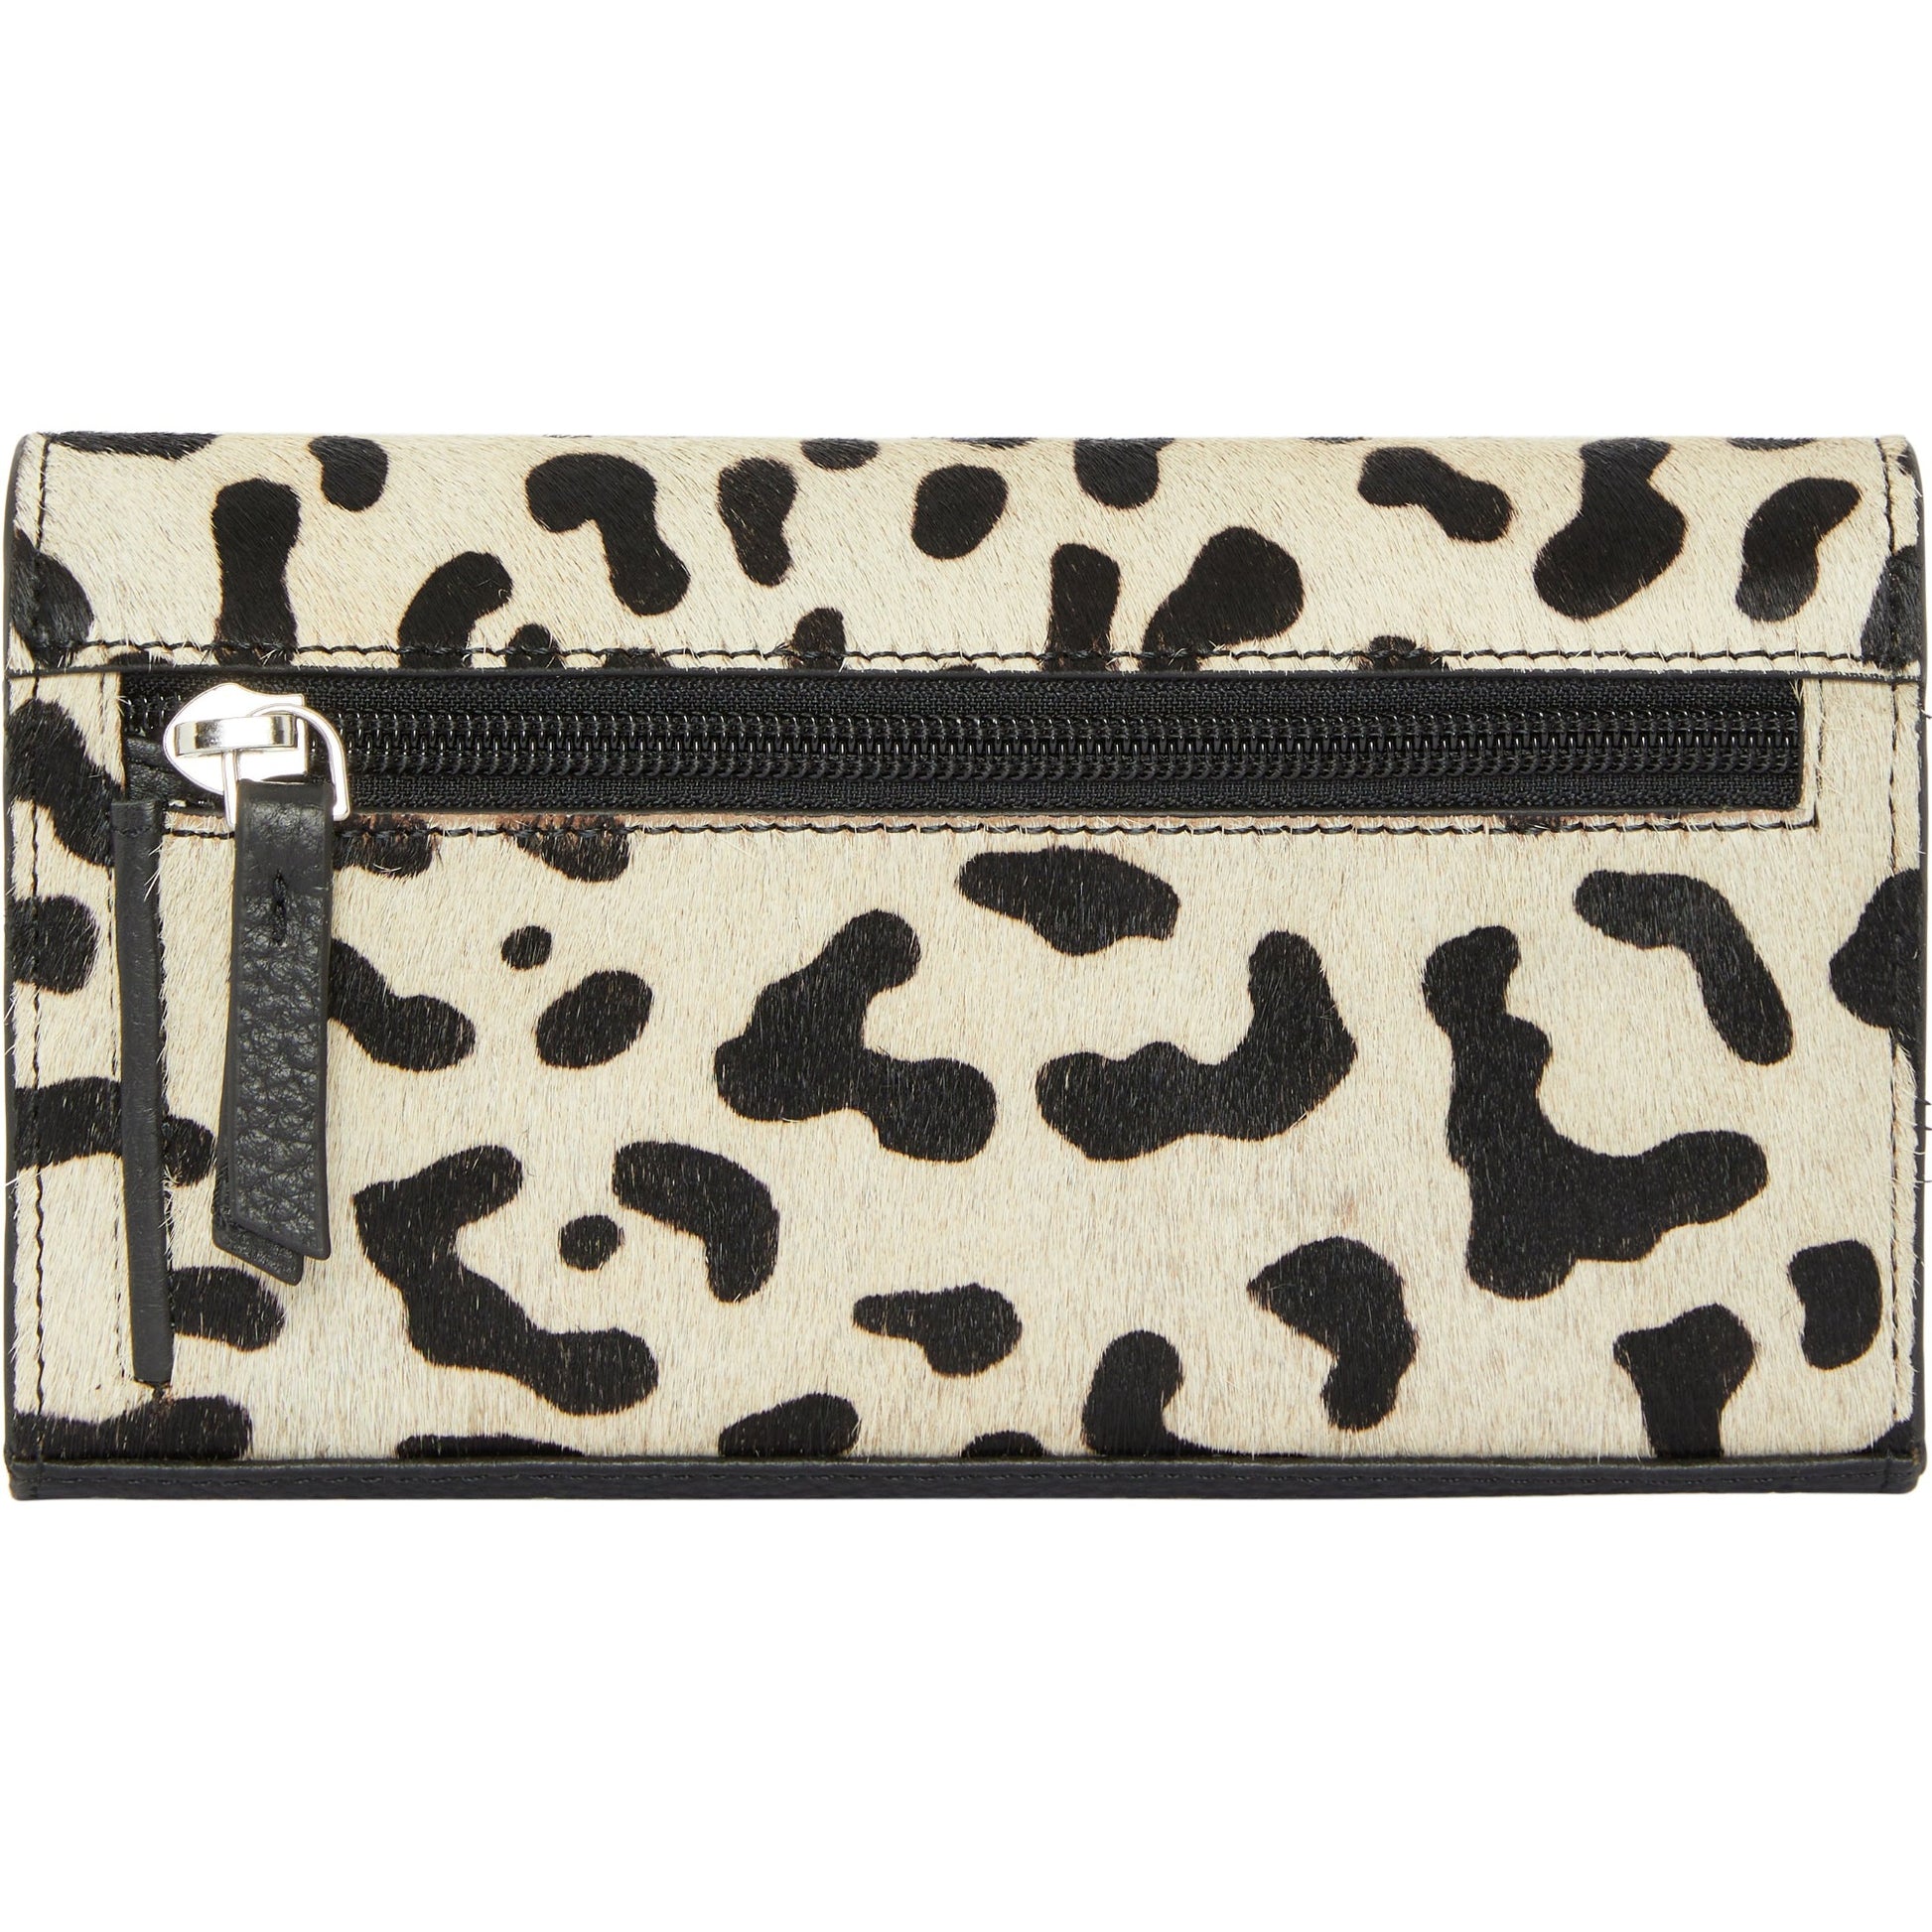 Ivory Animal Print Leather Multi Section Purse Brix and Bailey at Sostter